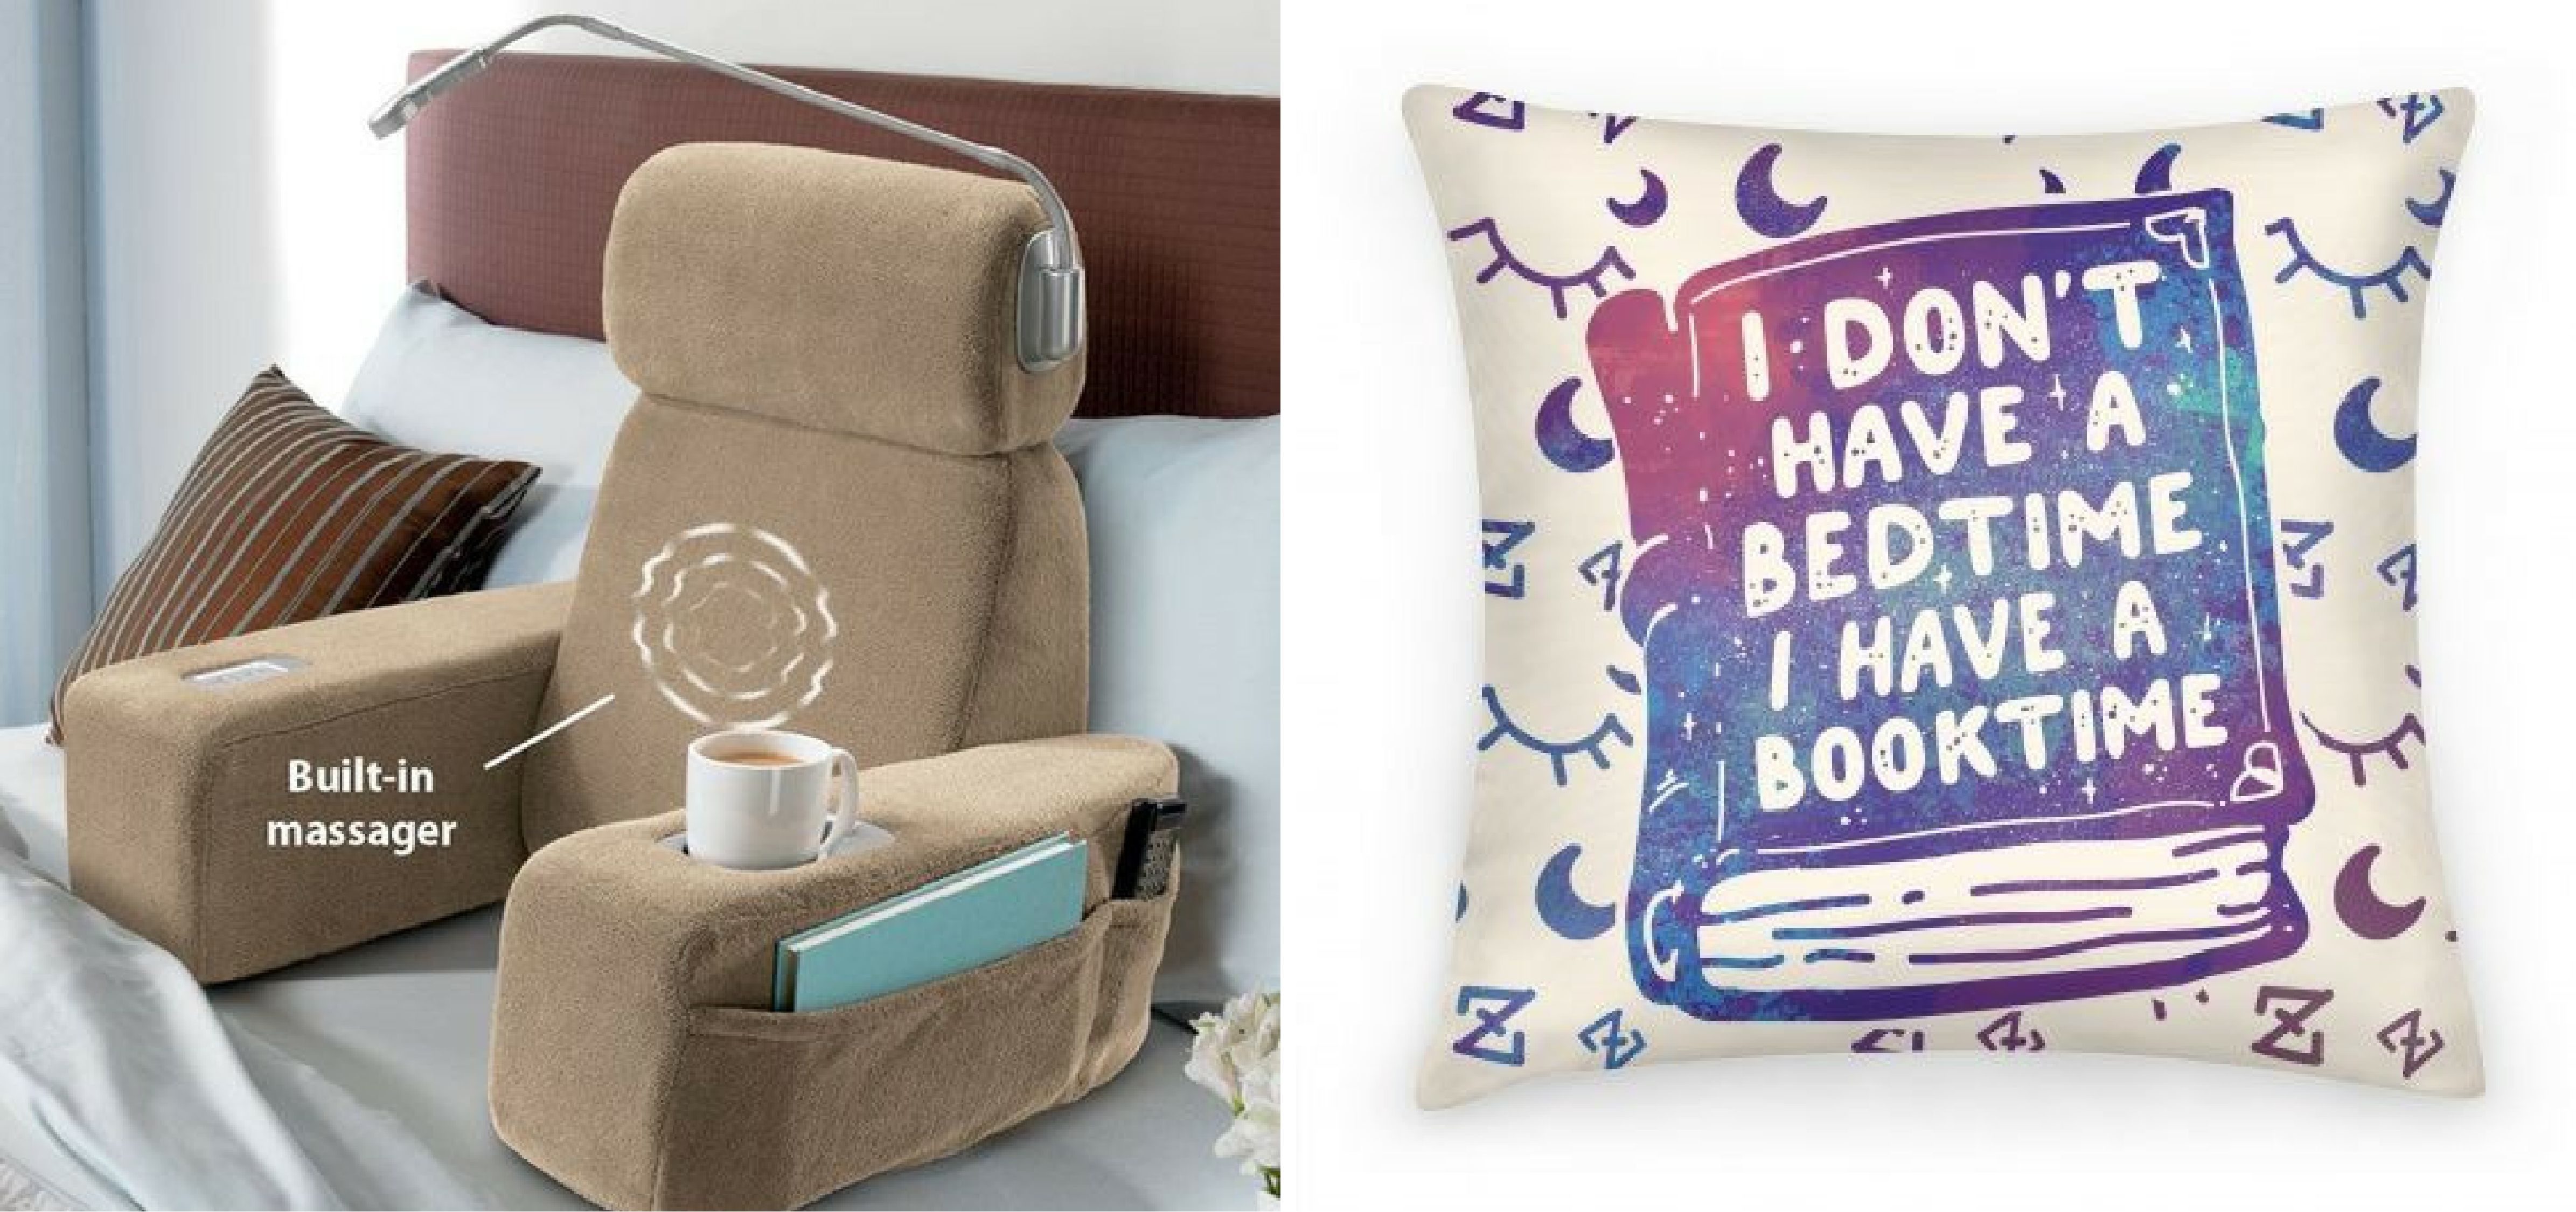 https://bookbub-res.cloudinary.com/image/upload/v1570651317/blog/accessories-for-reading-in-bed.jpg